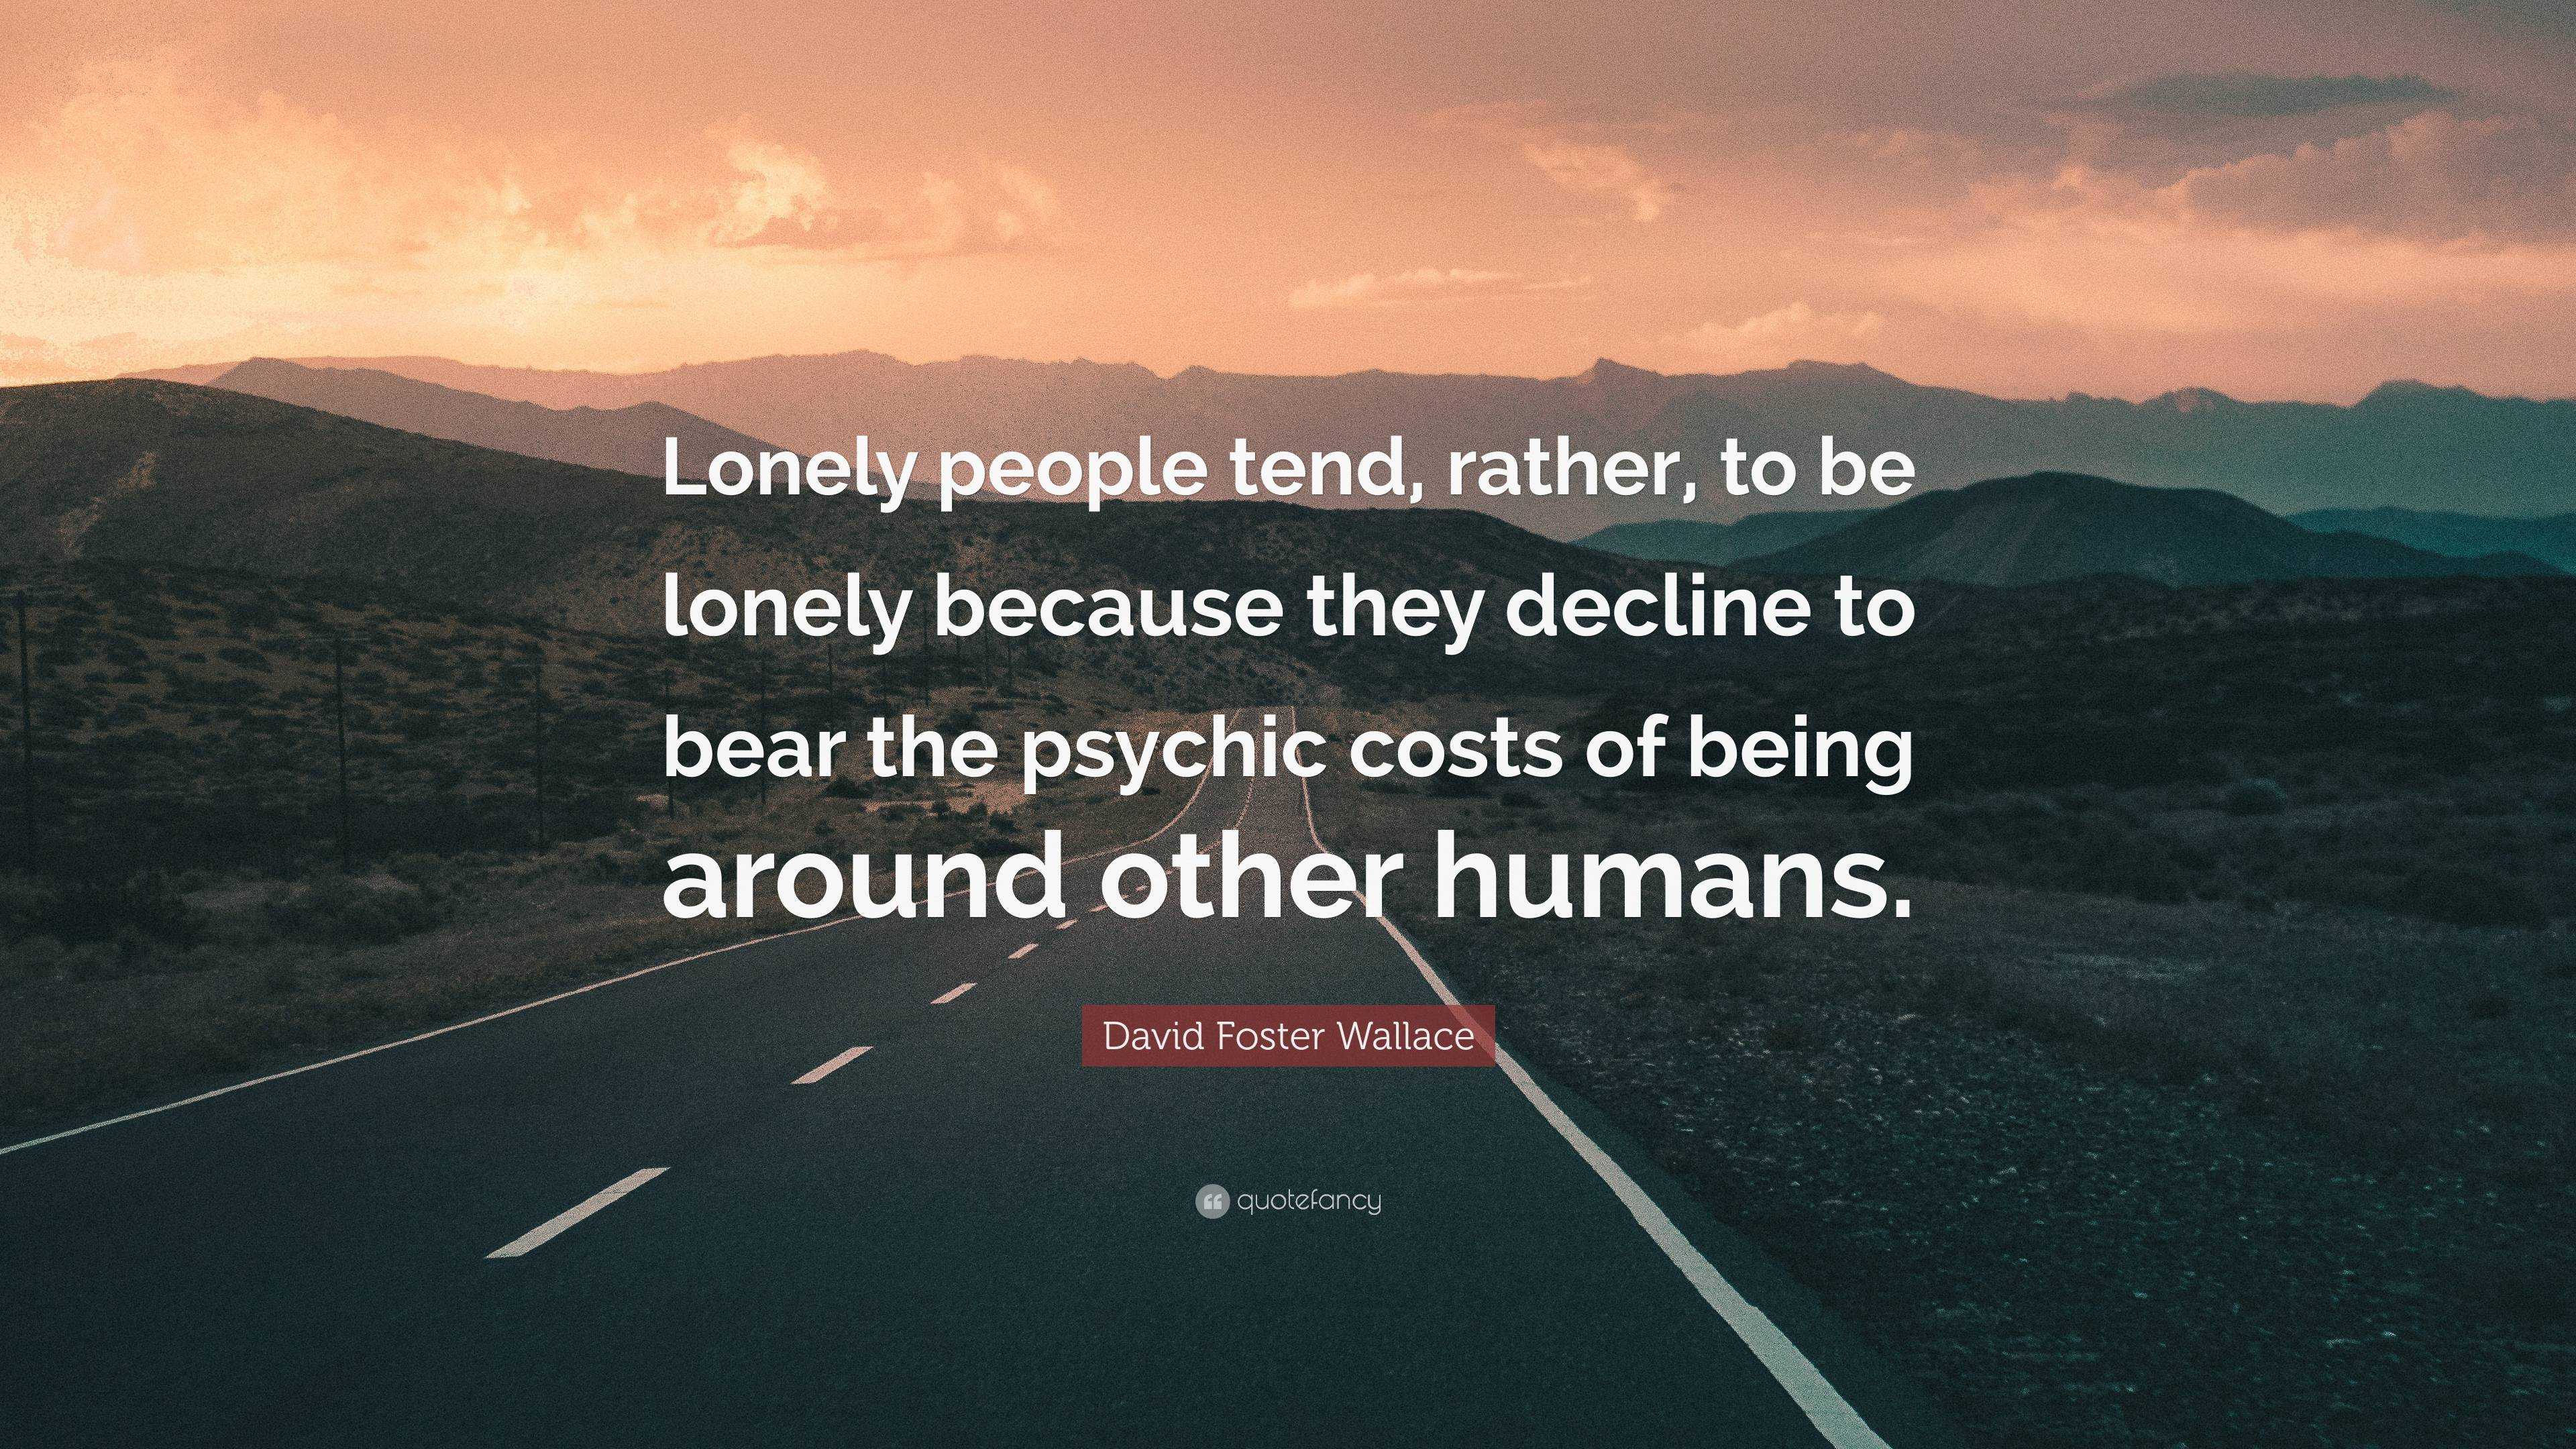 David Foster Wallace Quote: “Lonely people tend, rather, to be lonely ...